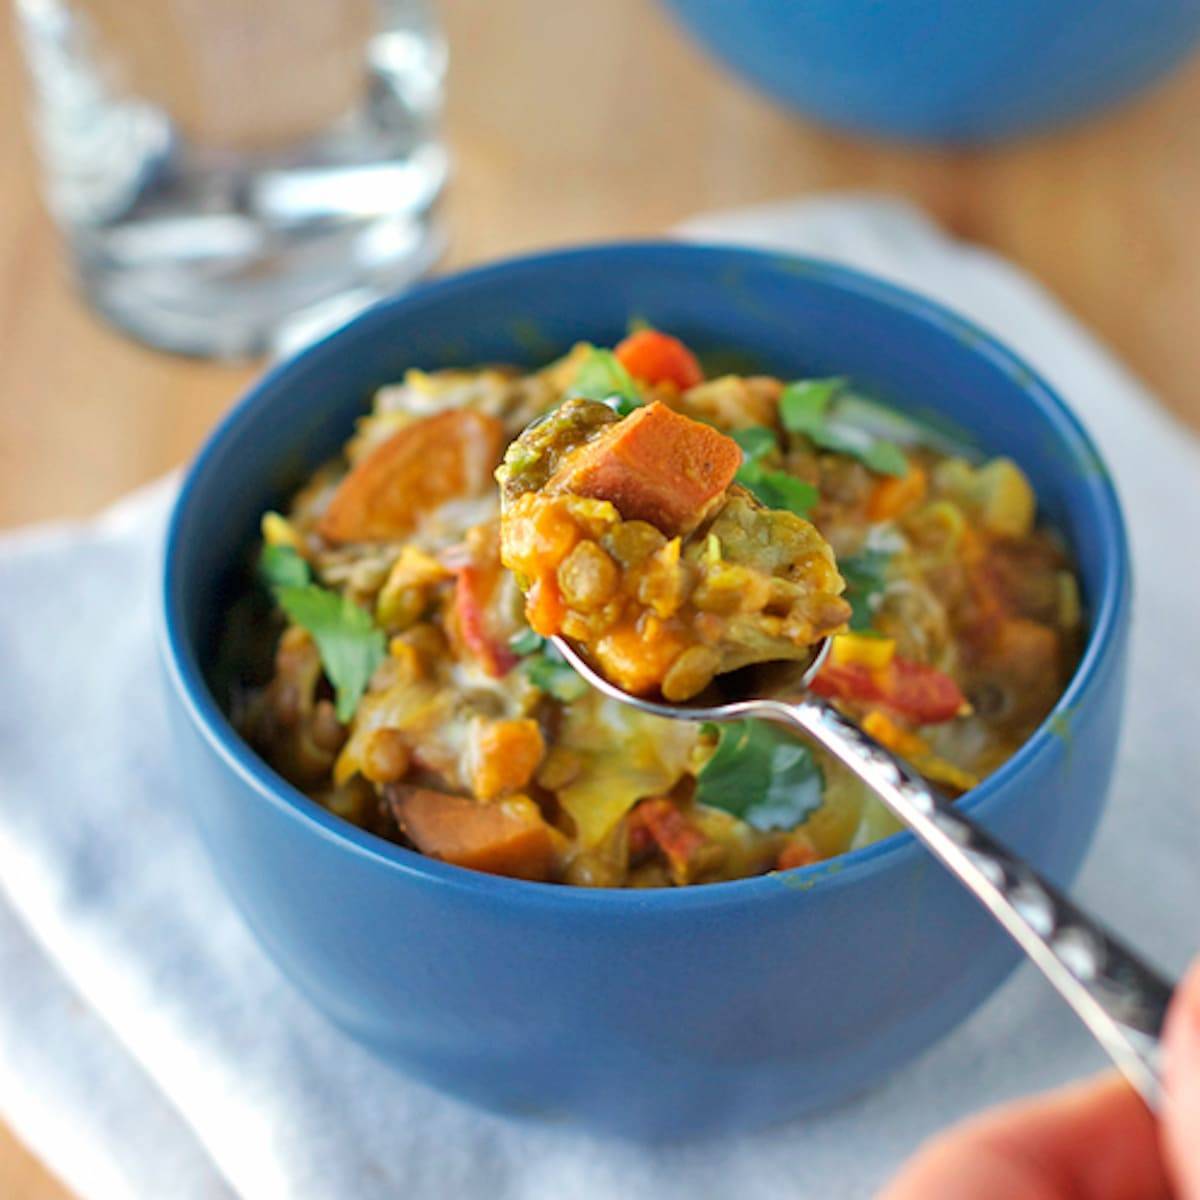 Creamy Thai sweet potatoes and lentils in a blue bowl and on a spoon.